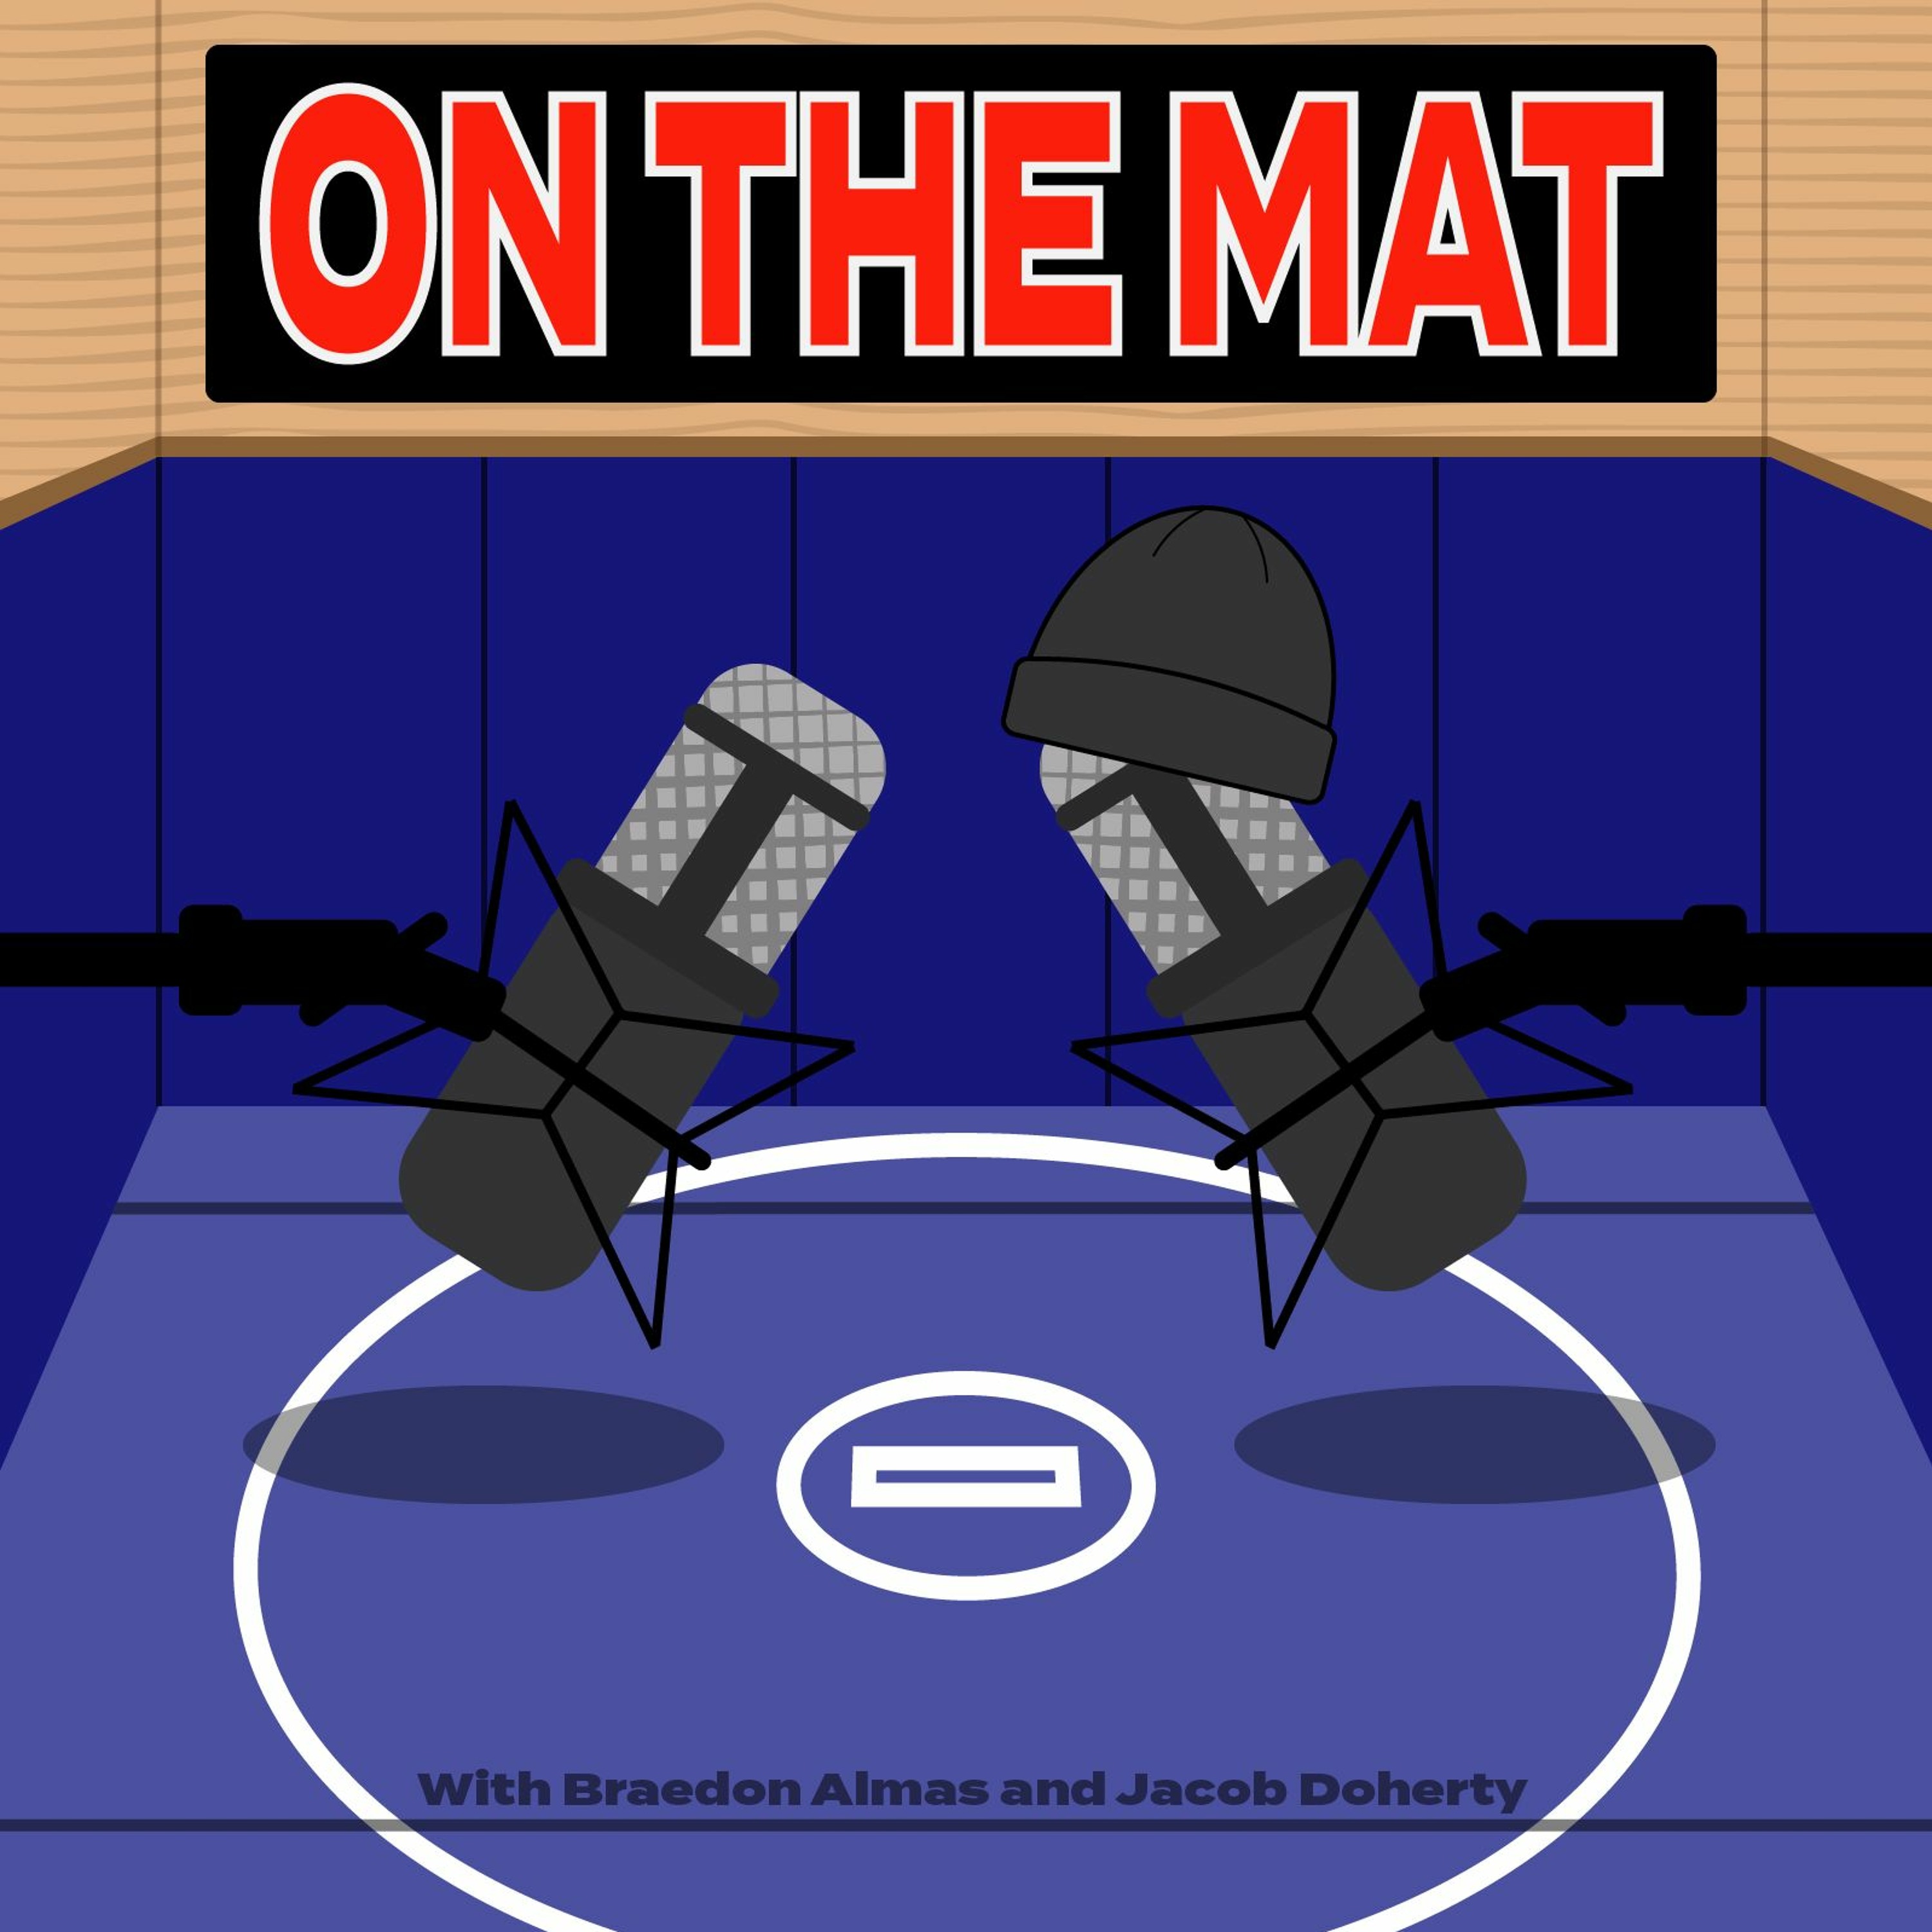 On the Mat Episode 1 - The Beginning